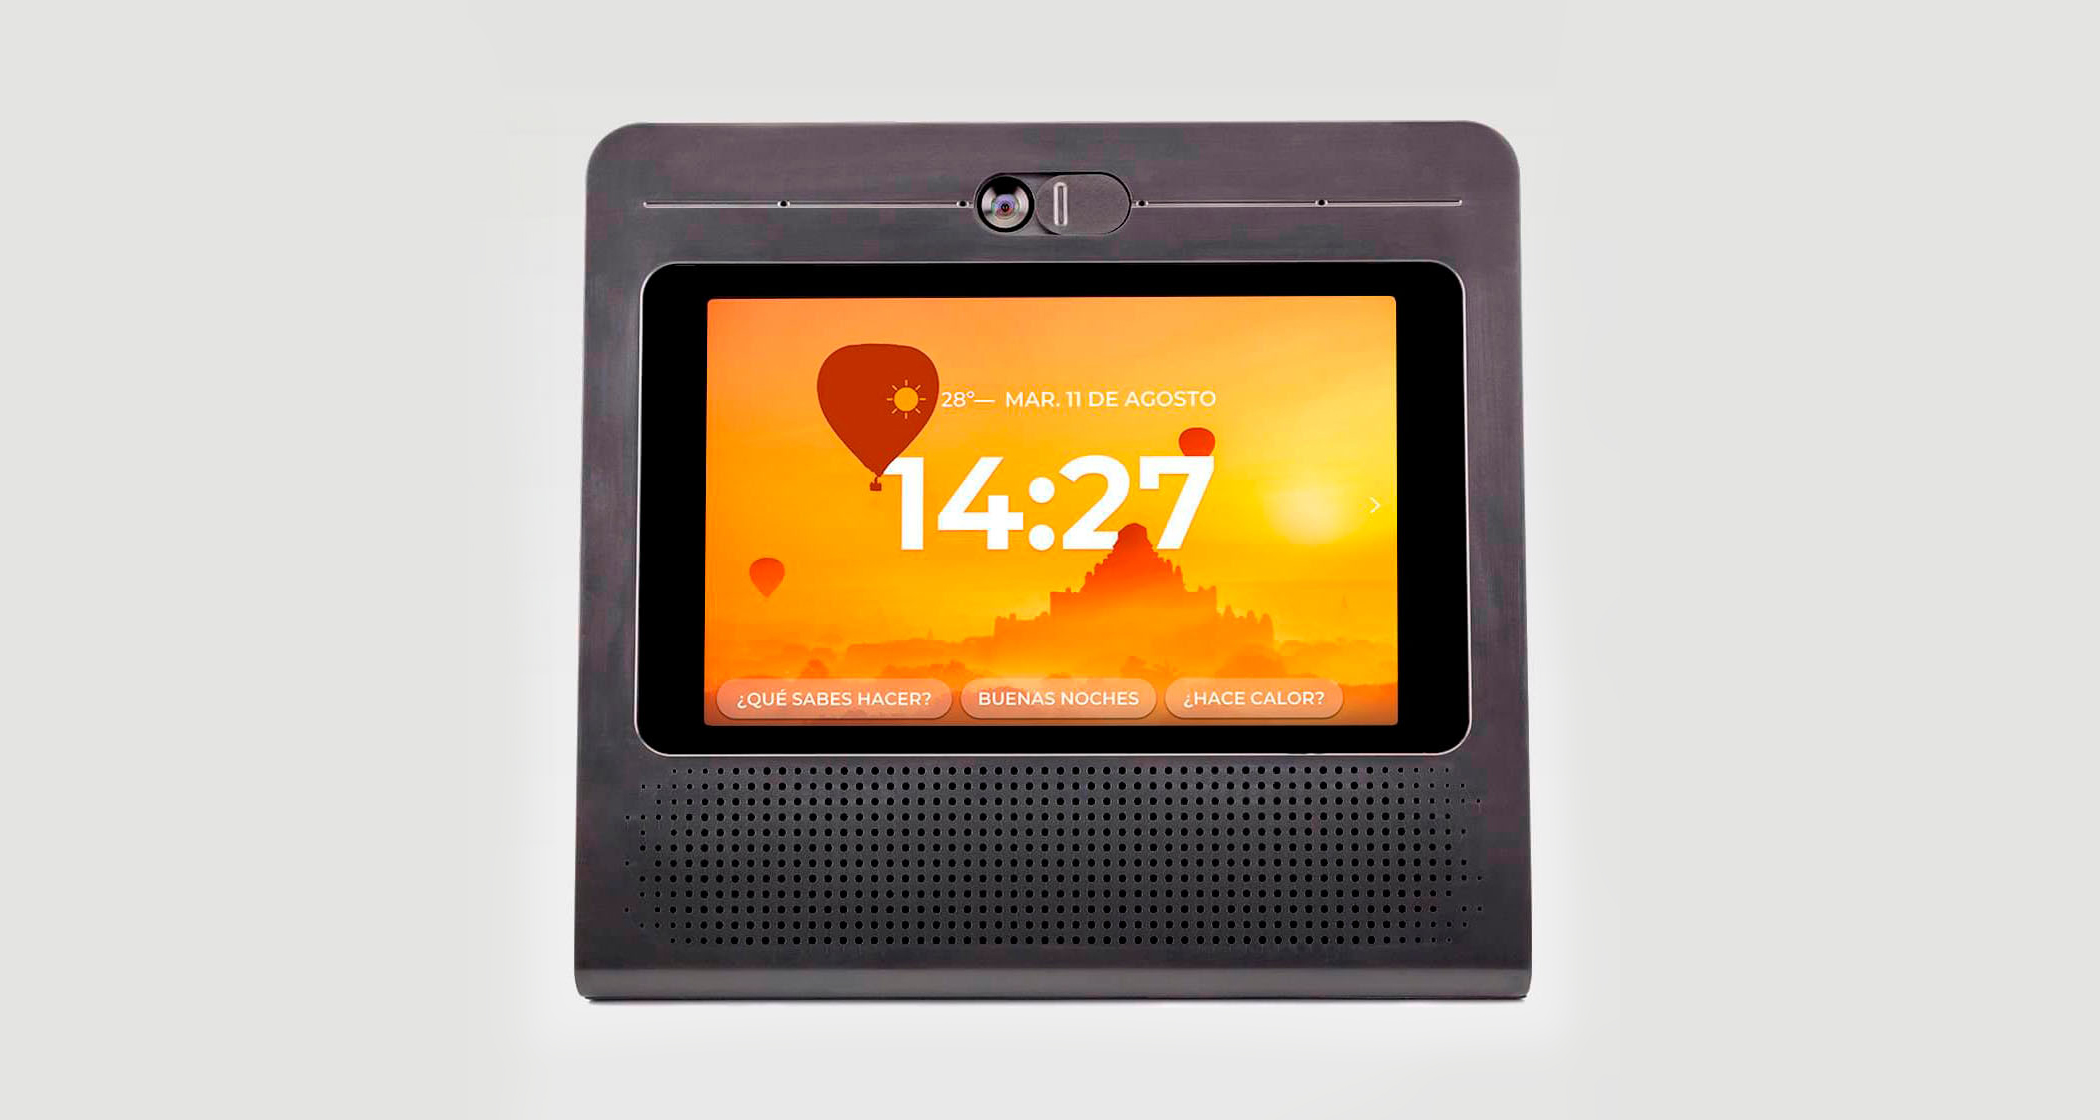 Large 8-inch LED touch screen.